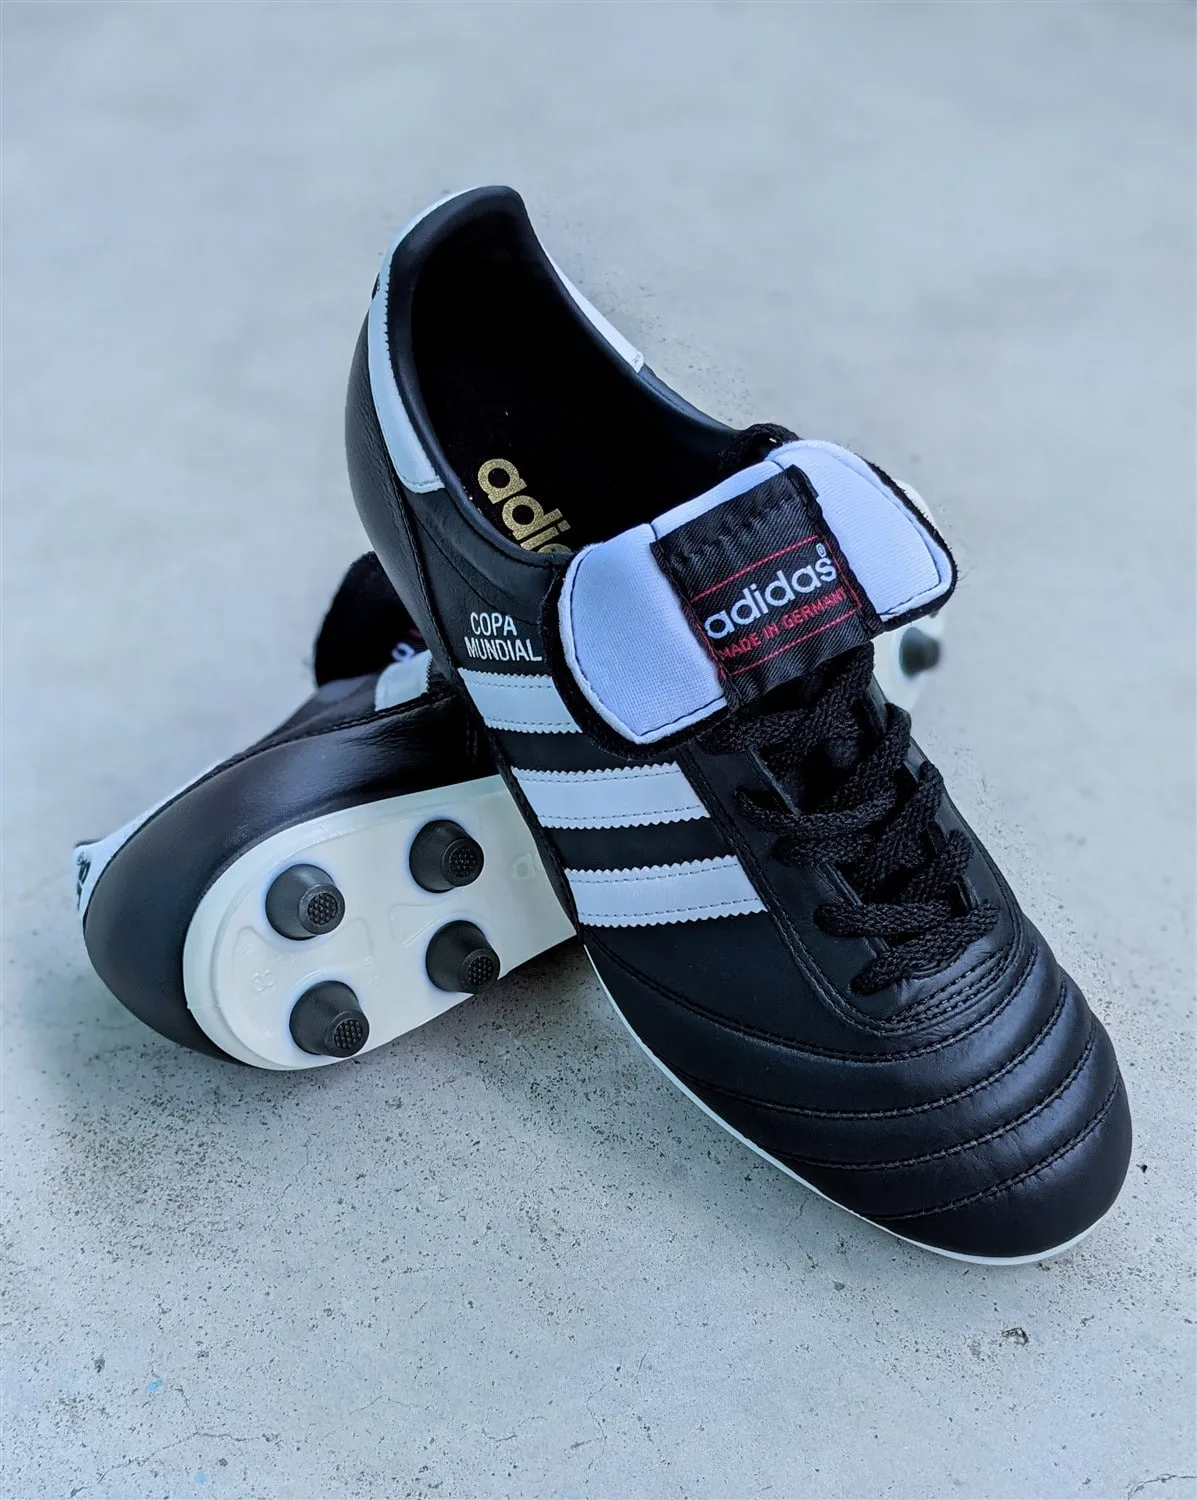 adidas Copa Mundial football boots soccer cleats